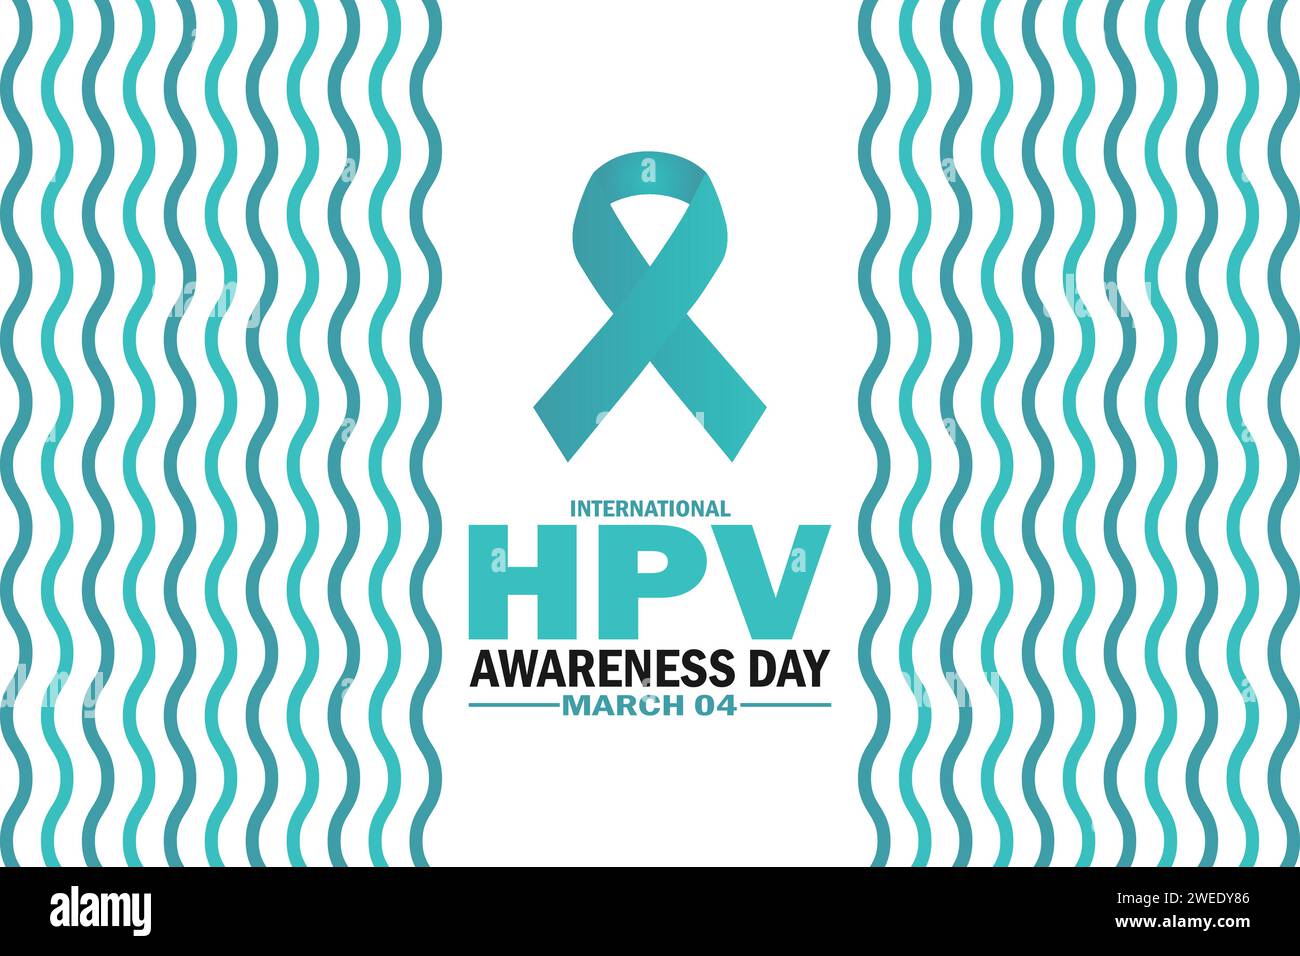 International HPV Awareness Day Vector Template Design Illustration. March 4. Suitable for greeting card, poster and banner Stock Vector